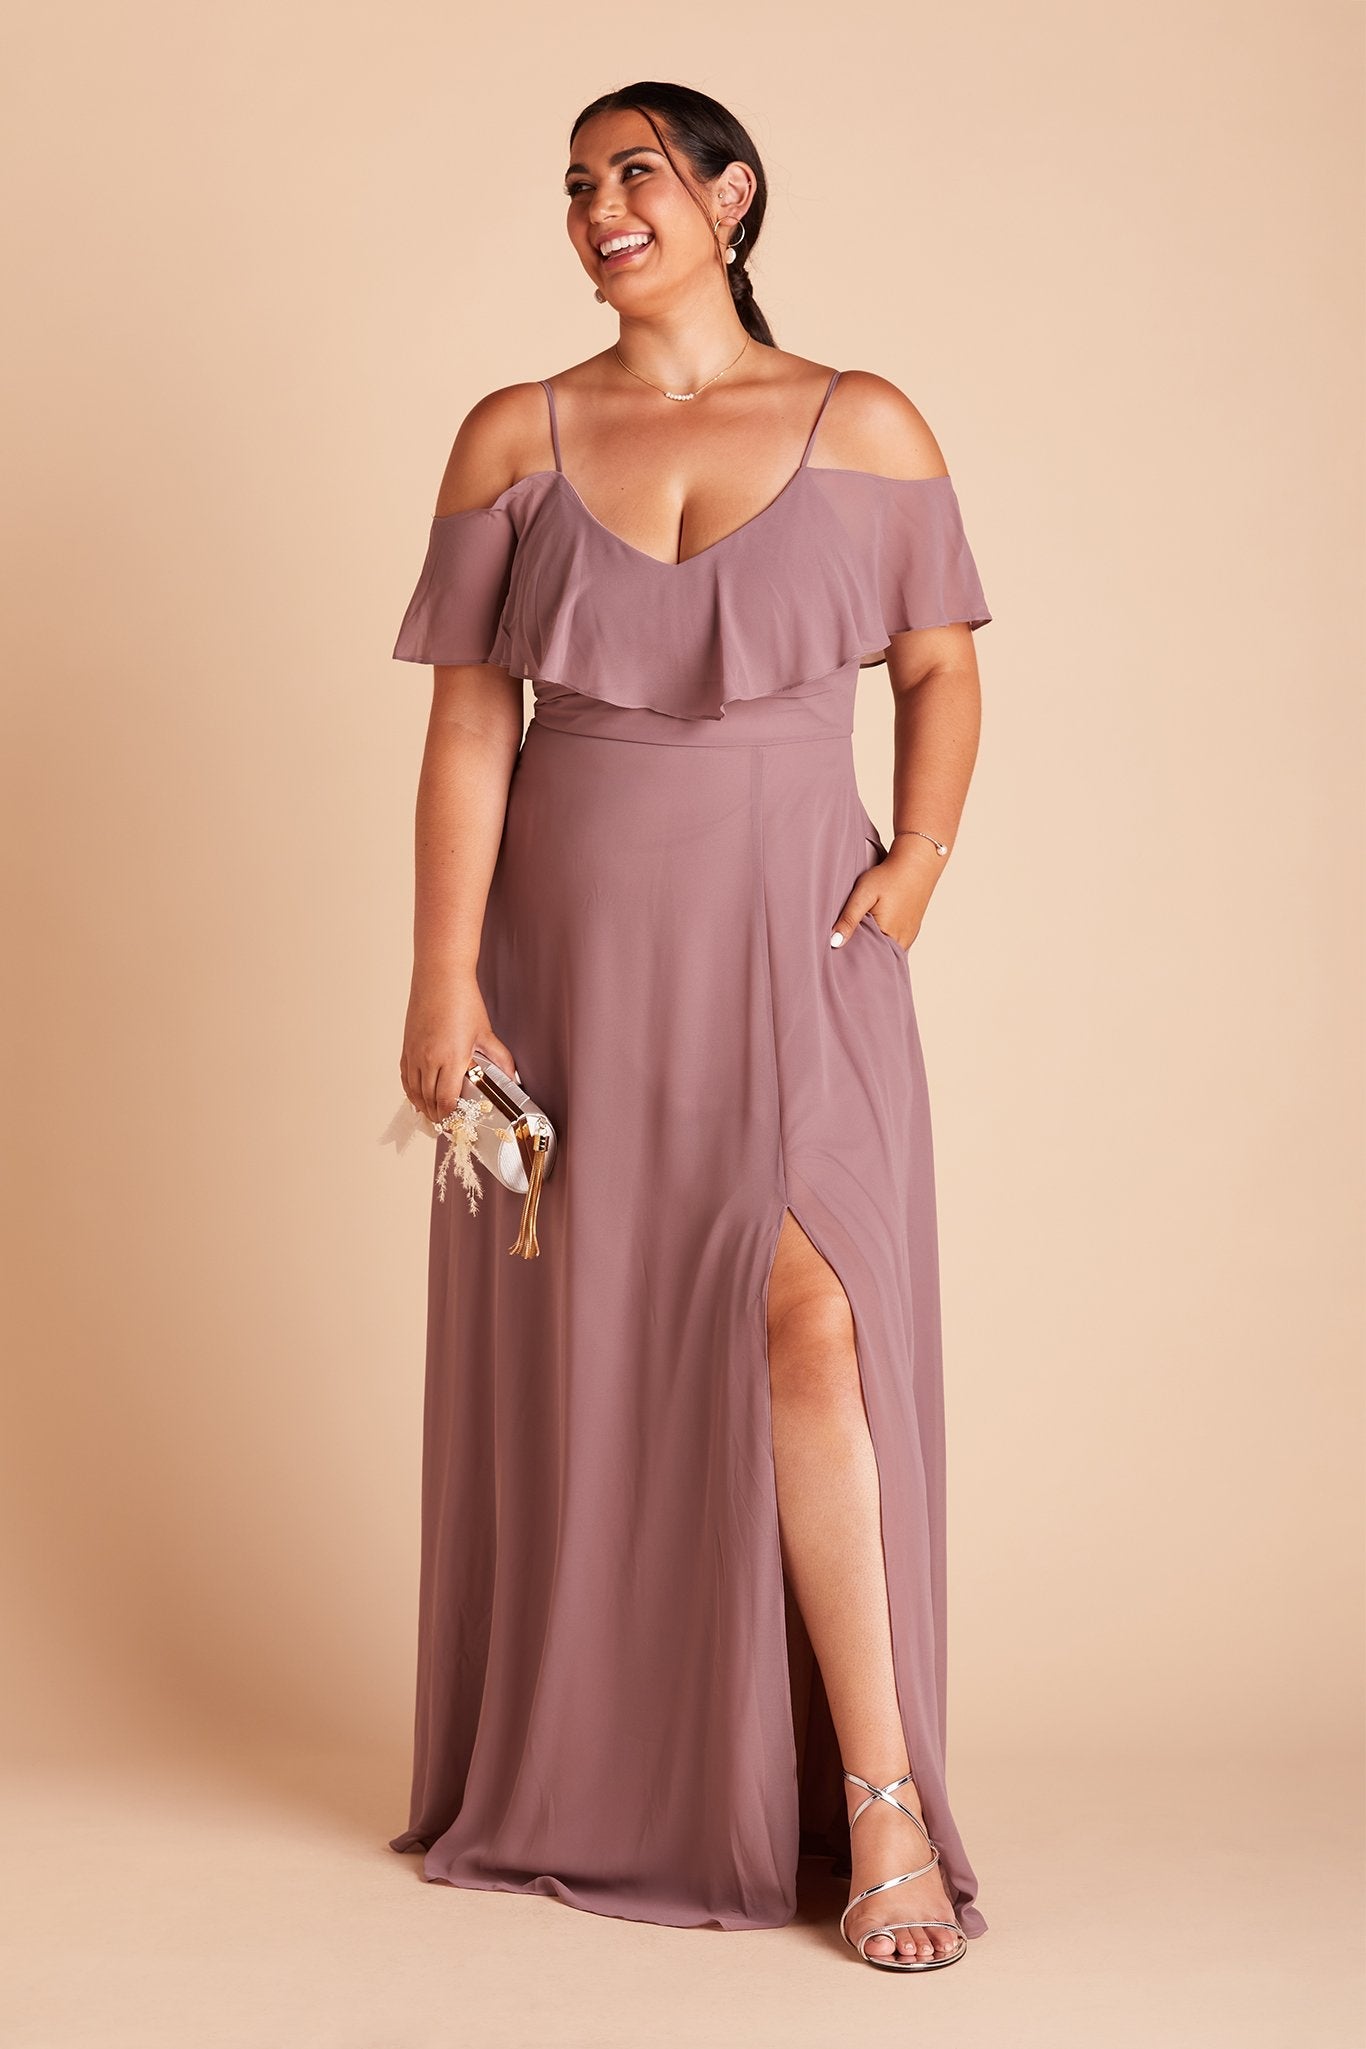 Jane convertible plus size bridesmaid dress with slit in dark mauve chiffon by Birdy Grey, front view with hand in pocket